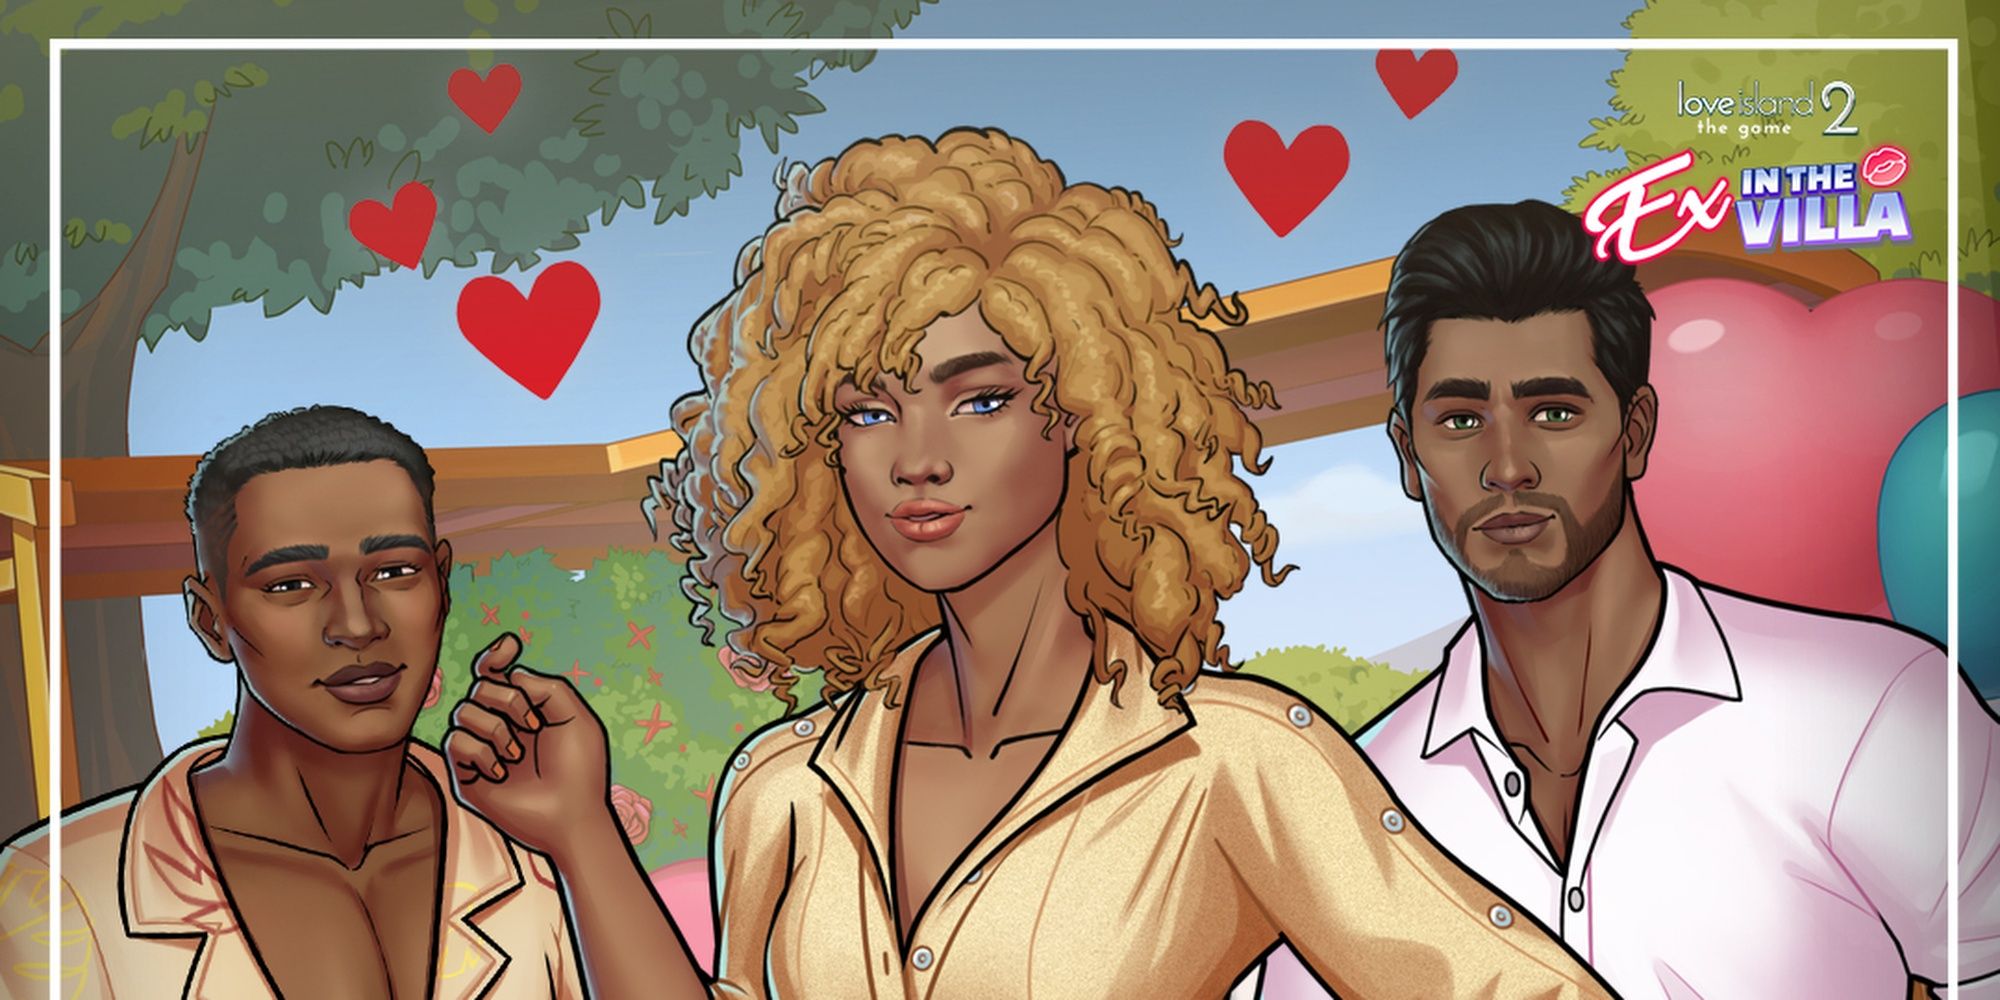 A promo image for Love Island The Game: Ex in the Villa